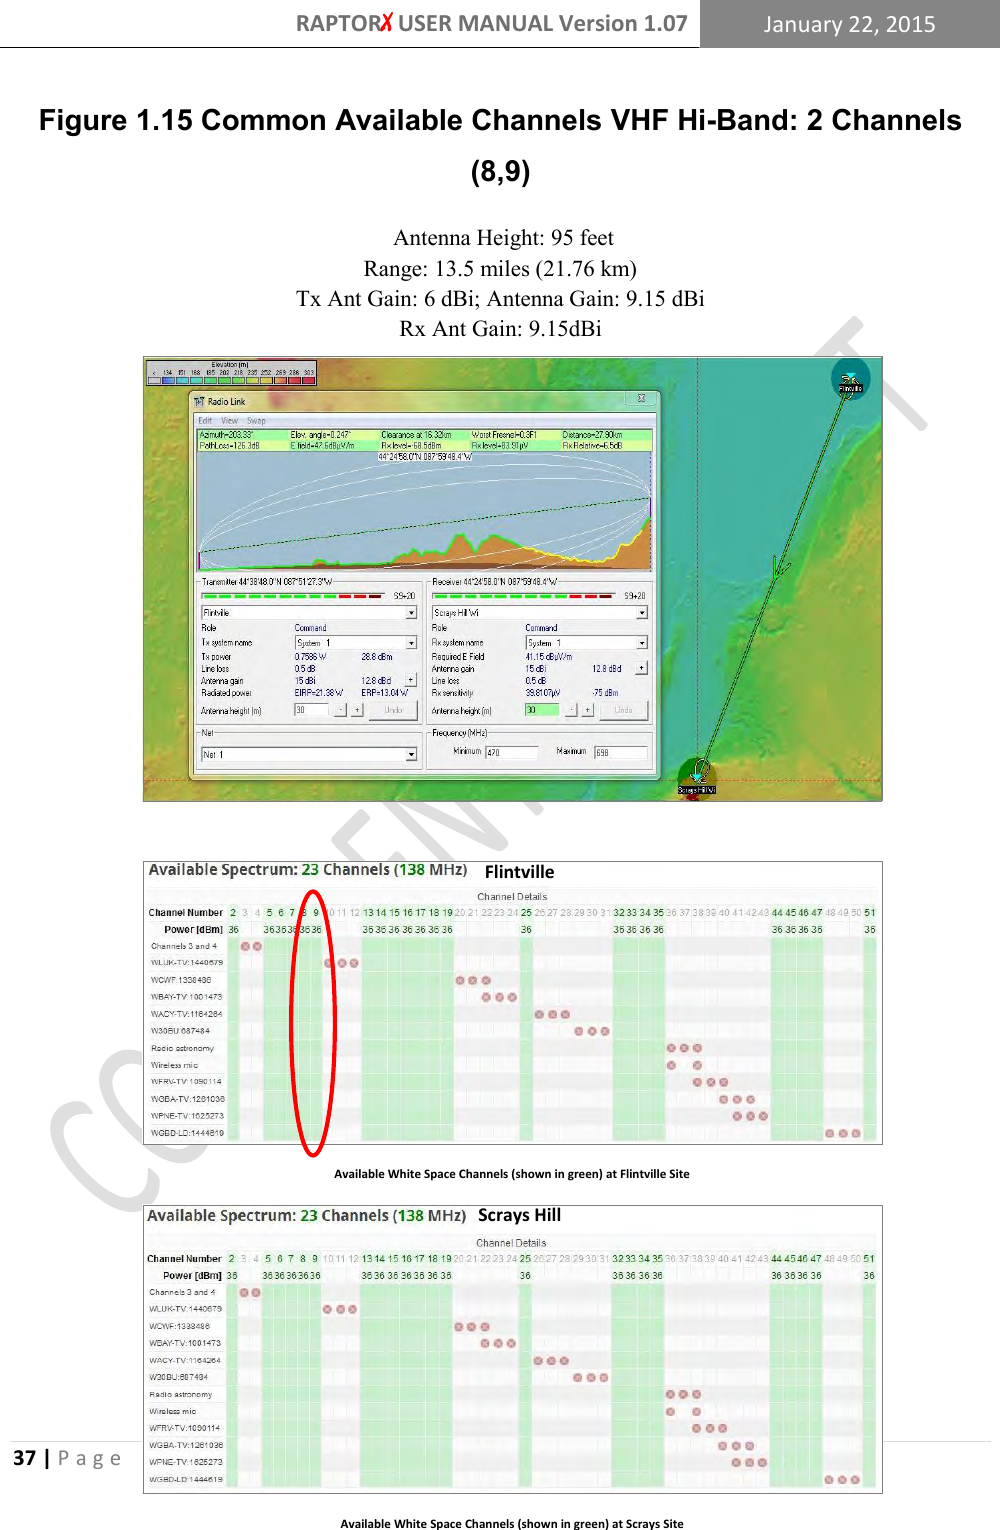 RAPTORX USER MANUAL Version 1.07 January 22, 2015  37 | P a g e   Figure 1.15 Common Available Channels VHF Hi-Band: 2 Channels (8,9)  Antenna Height: 95 feet Range: 13.5 miles (21.76 km) Tx Ant Gain: 6 dBi; Antenna Gain: 9.15 dBi Rx Ant Gain: 9.15dBi                       UHF White Space Point-to-Point Link Channels: 13- 51;  Range: 17.3 miles (27.9 km) EIRP: 36 dBm; Rx Ant Gain: 15 dBi Ant Height: 98” Scrays HillFlintvilleAvailable White Space Channels (shown in green) at Flintville SiteAvailable White Space Channels (shown in green) at Scrays Site